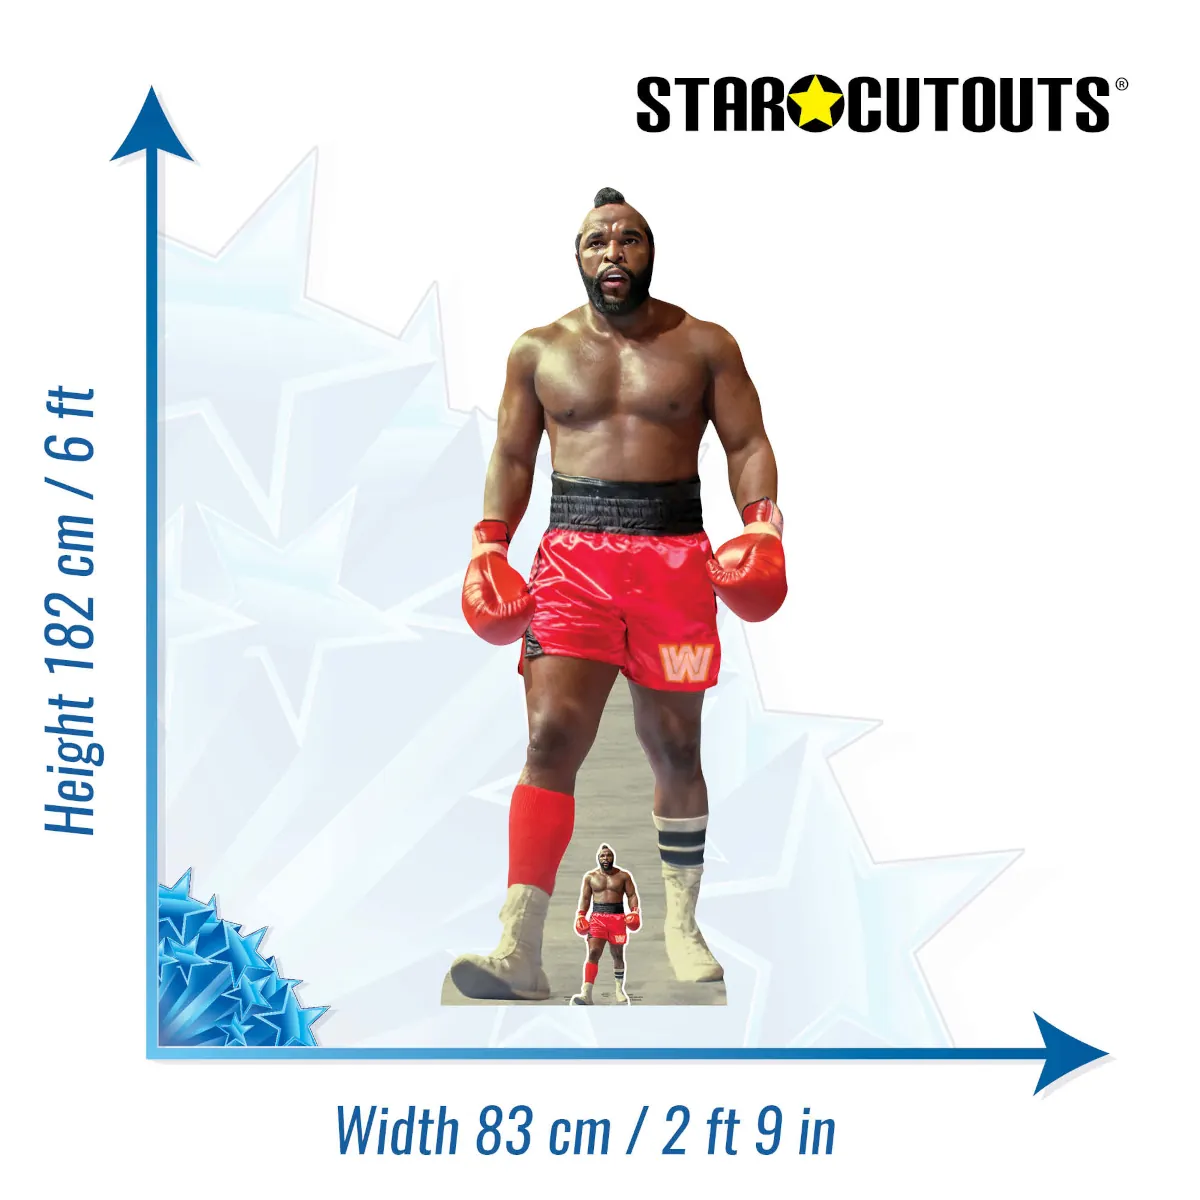 SC4187 Mr. T (American ActorWrestler) (WWE) Official Lifesize + Mini Cardboard Cutout Standee Size